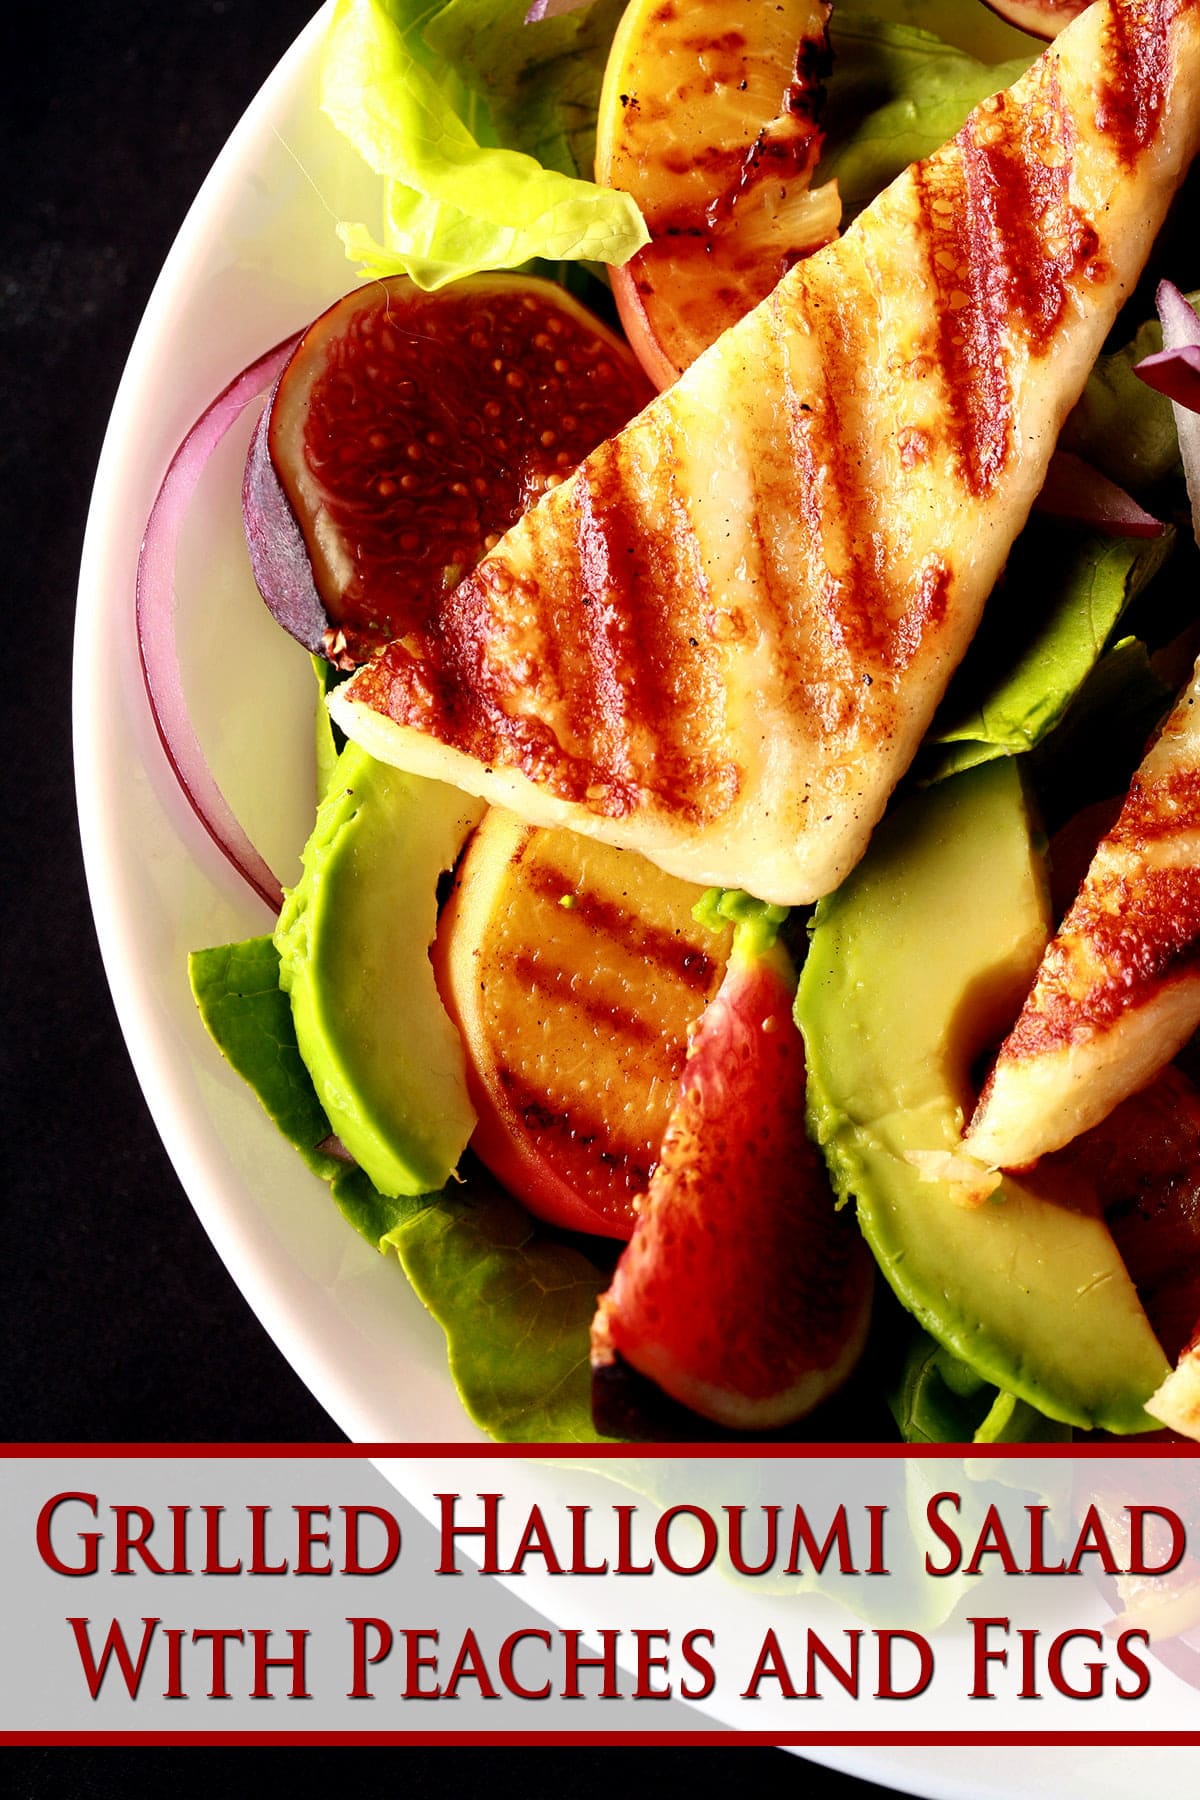 A bowl of salad, with sliced figs, grilled peaches, and strips of grilled white cheese. Grilled Halloumi Salad with Peaches and Figs